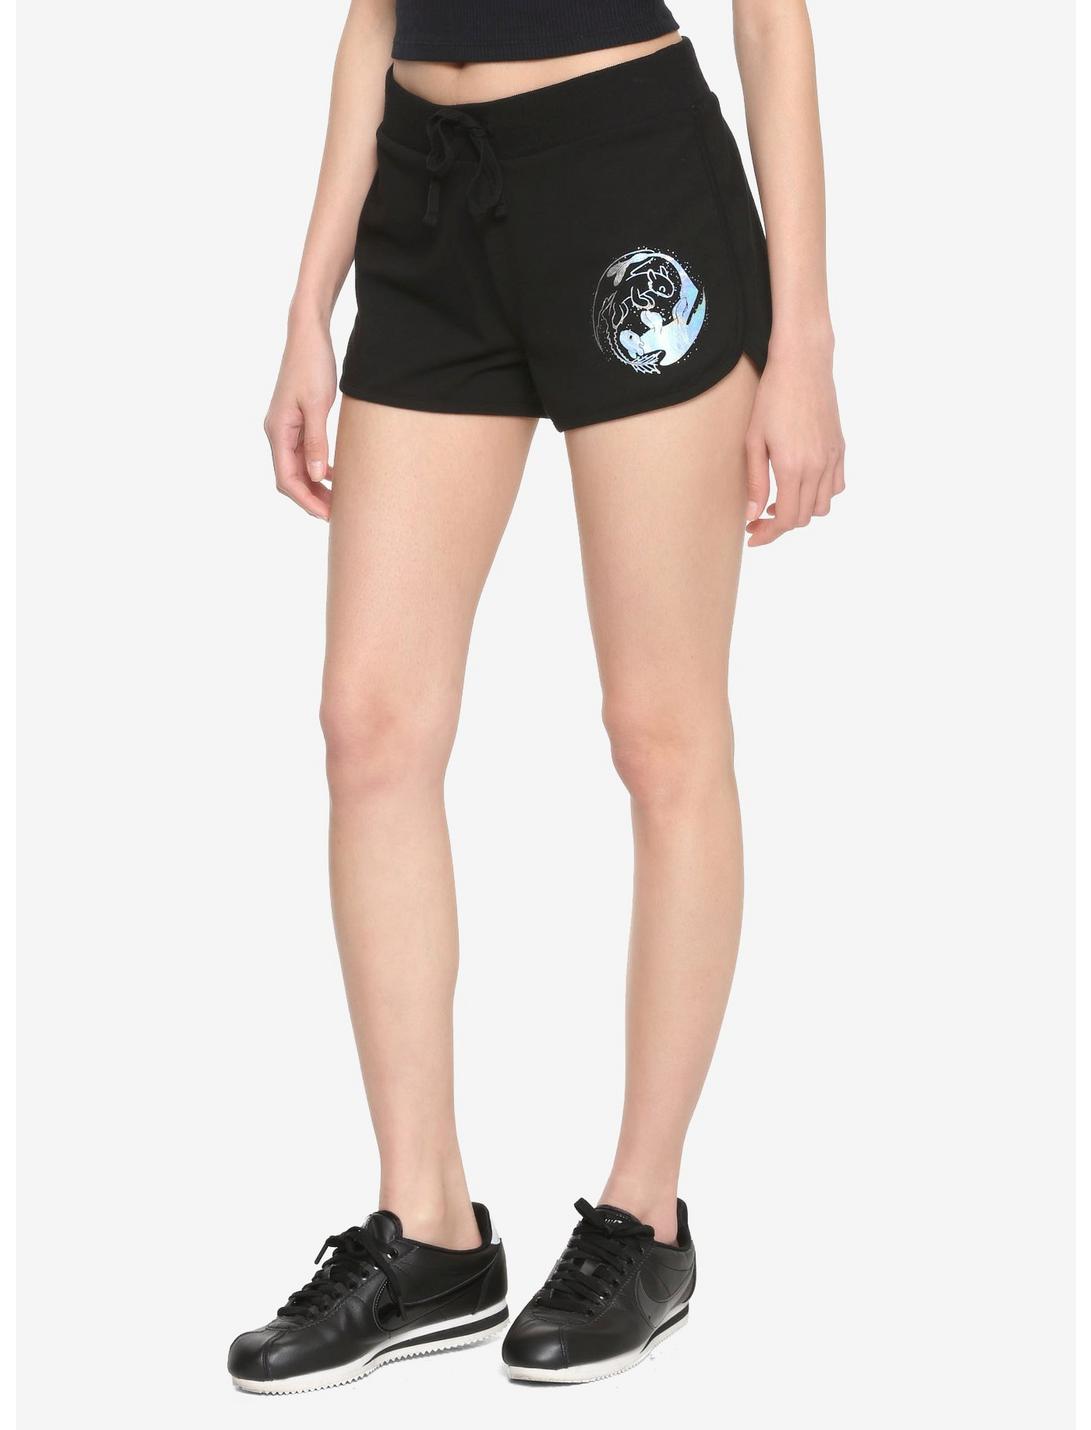 How To Train Your Dragon: The Hidden World Toothless & Light Fury Girls Soft Shorts, BLACK, hi-res